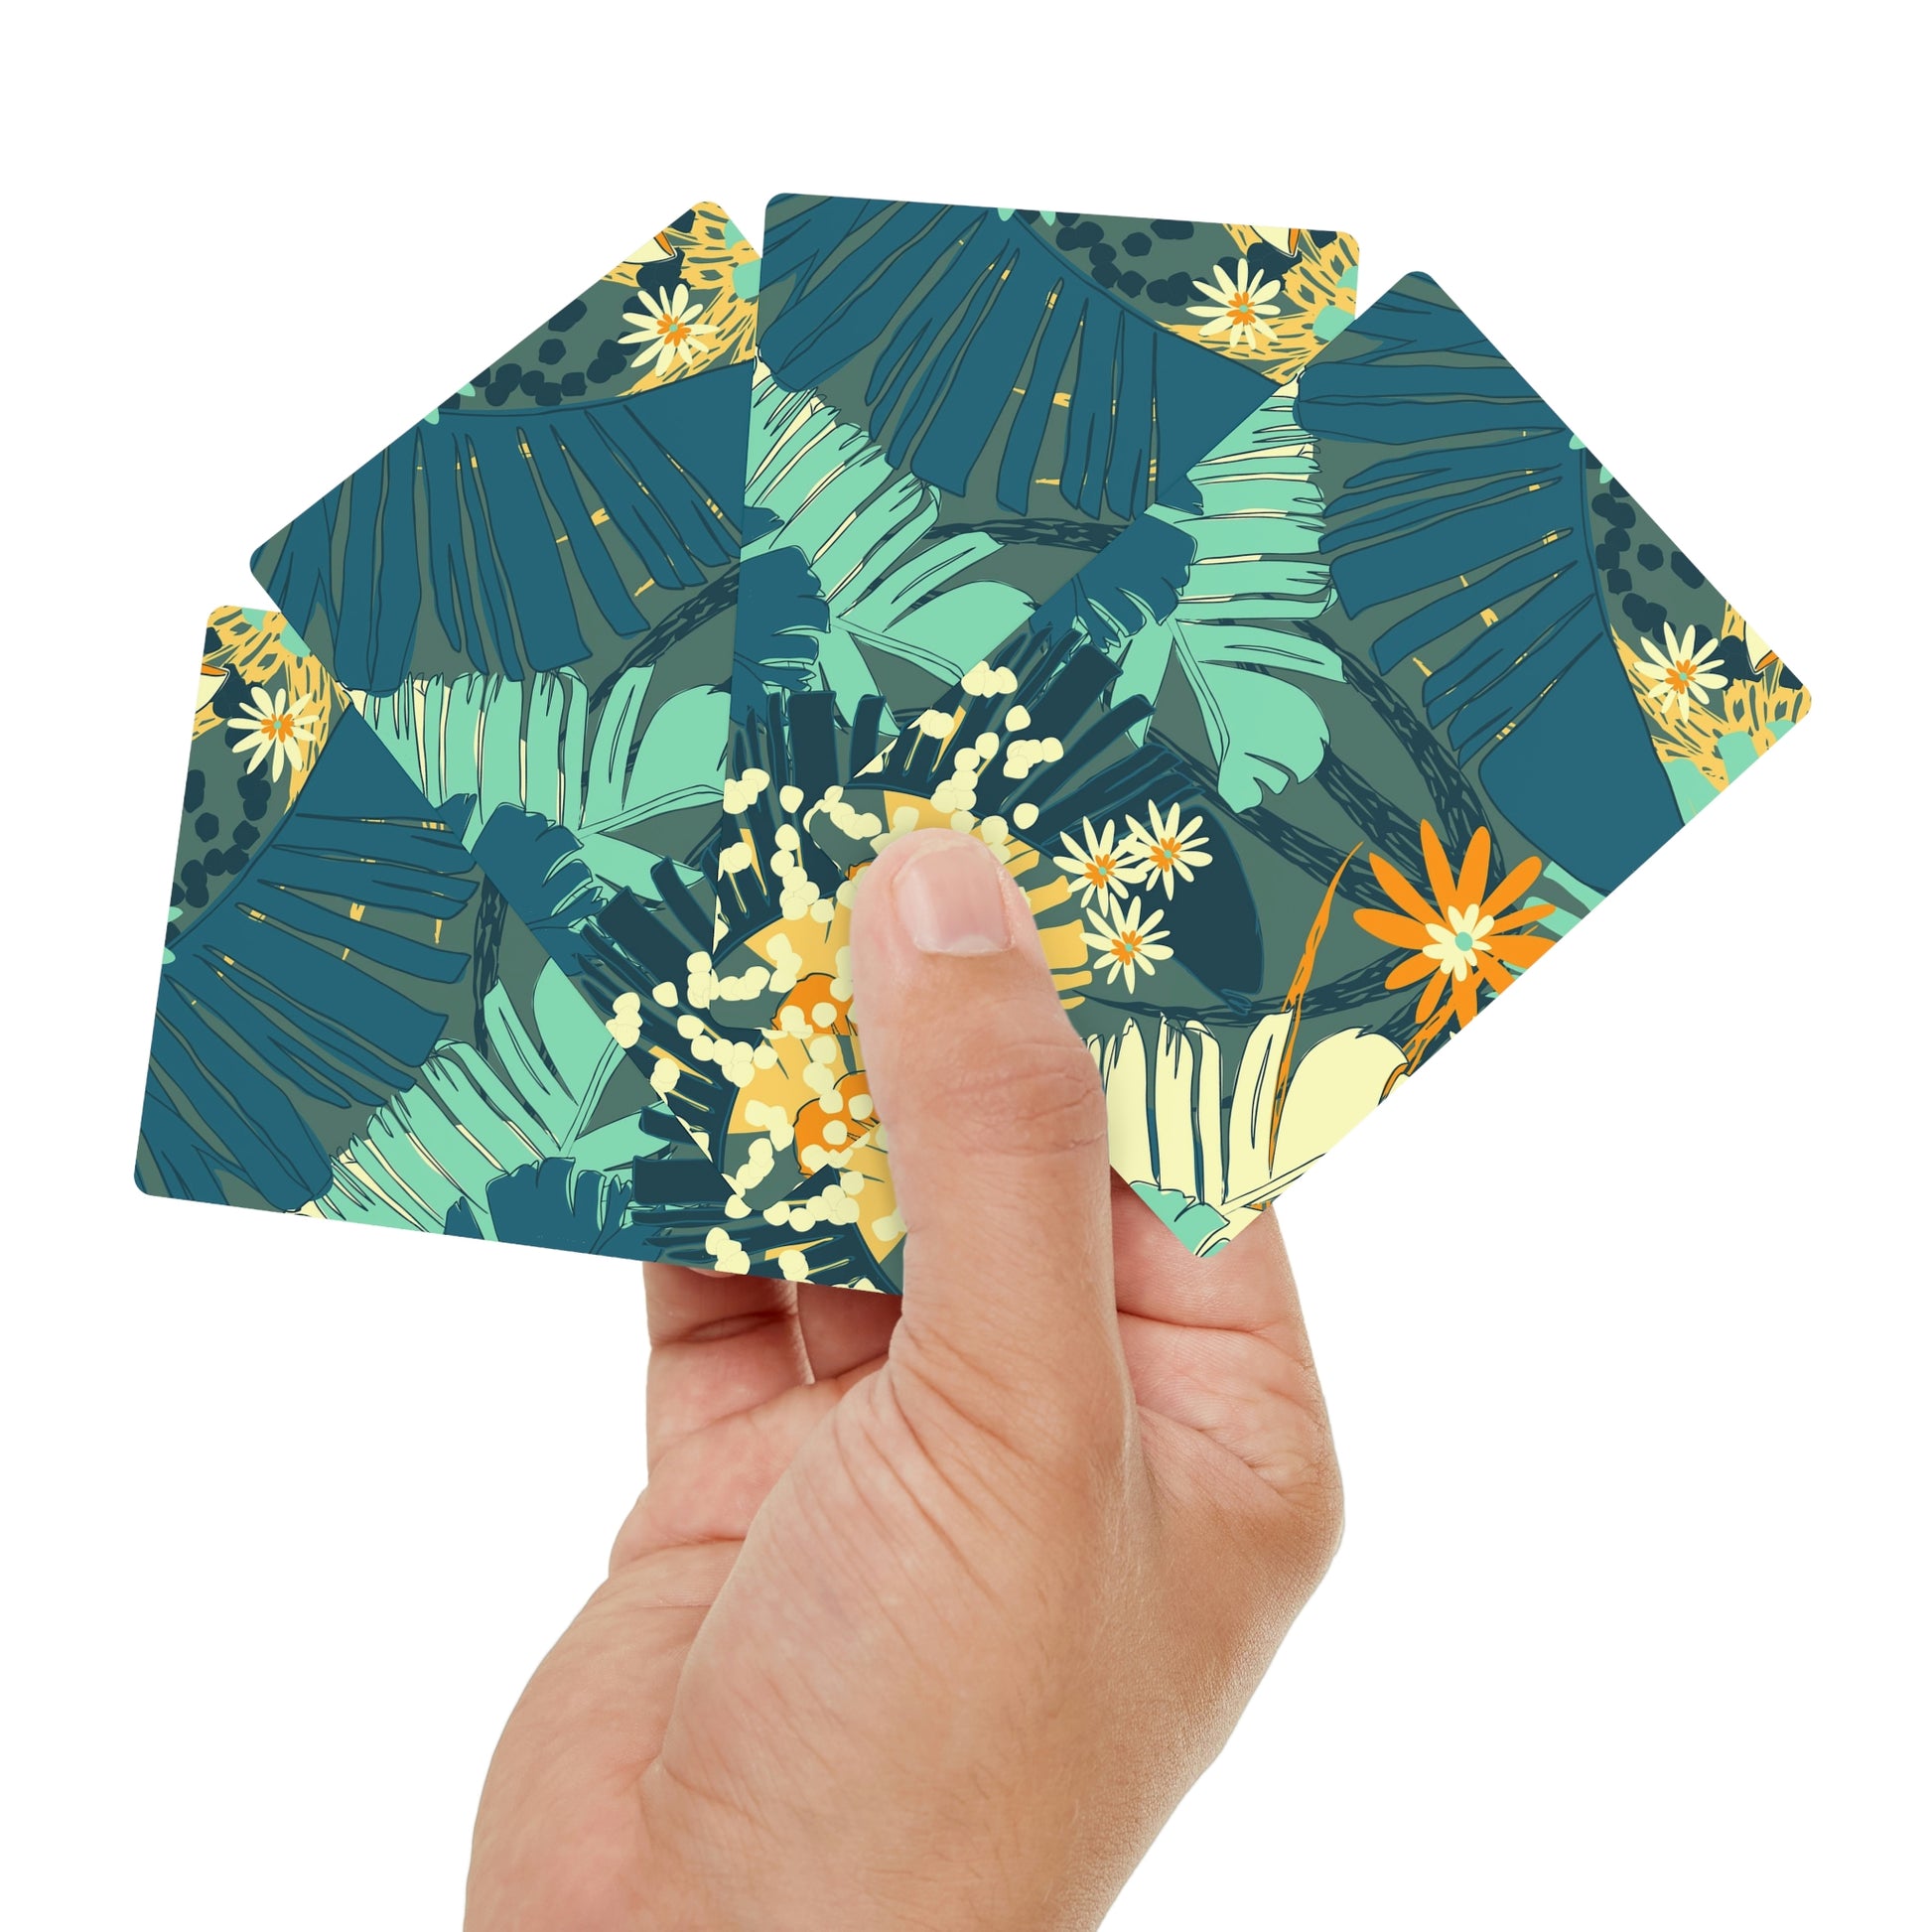 Jungle Blues Collection Poker Cards, Tropical Designer Poker Cards for your Vacation or Airbnb Home.